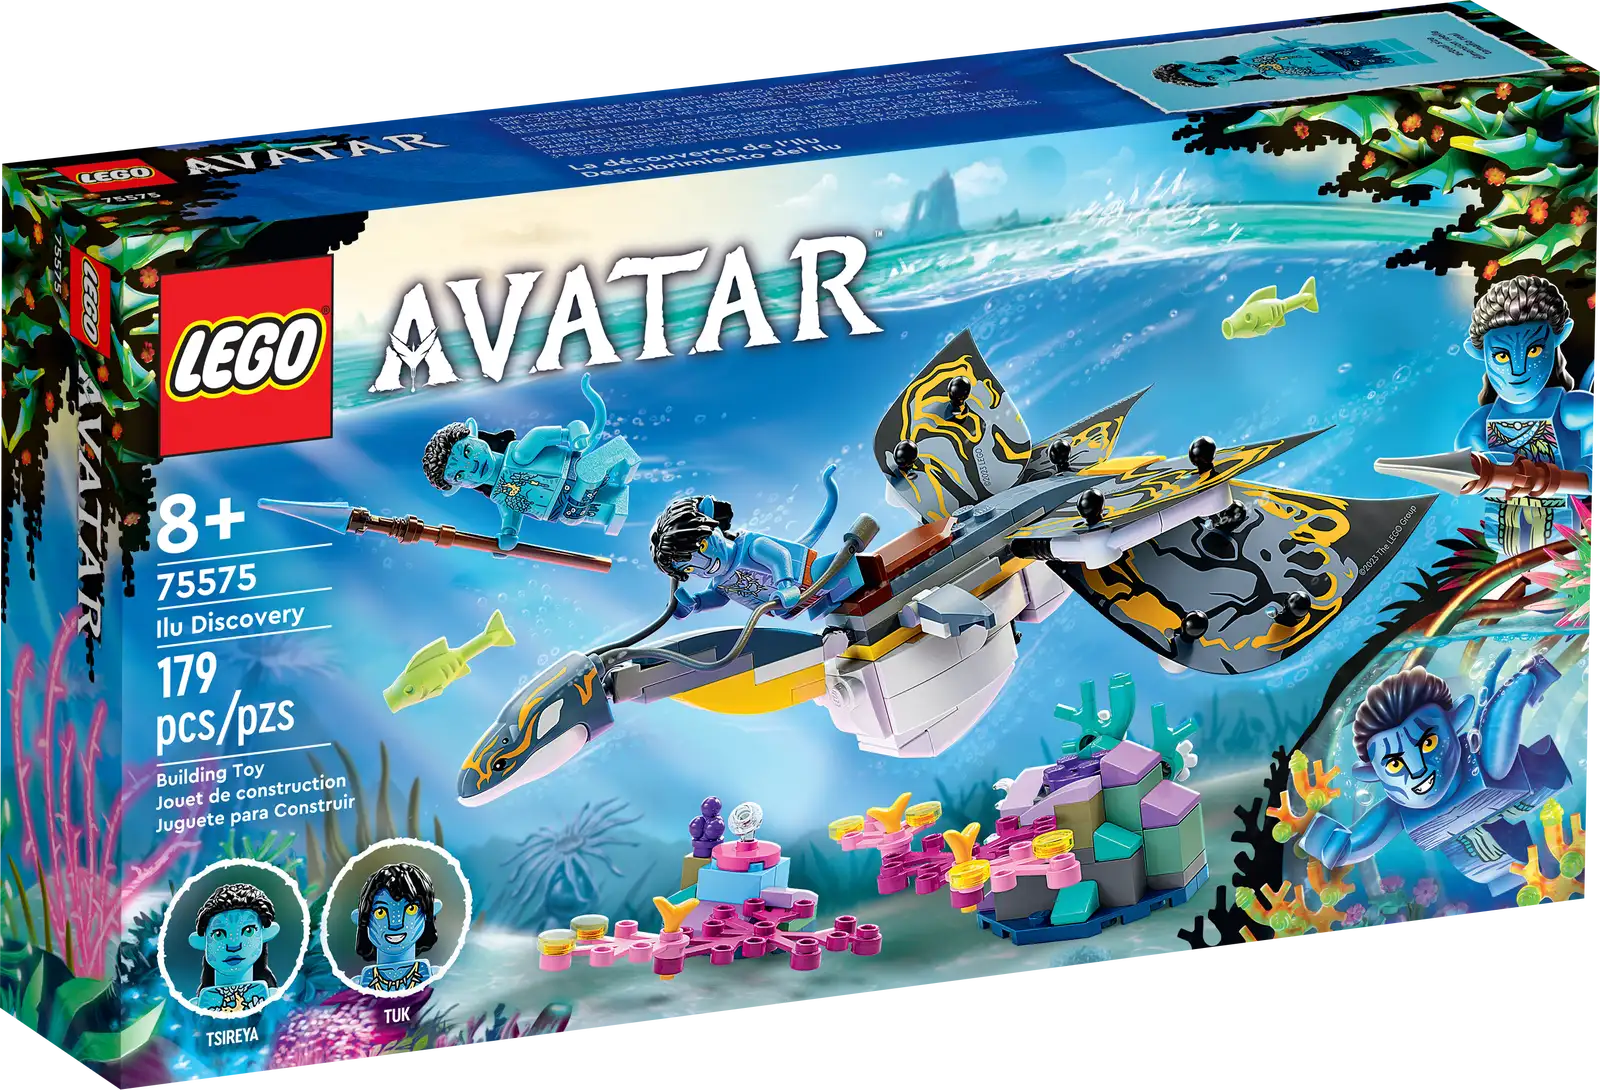 Kids and Avatar movie fans aged 8+ can travel to the imaginary exoplanetary moon of Pandora with this LEGO® Avatar Ilu Discovery (75575) set. Relive favorite moments from Avatar: The Way of Water or create dynamic scenes and storylines with the posable ilu figure, Tsireya and Tuk minifigures and Pandoran coral-reef setting. Includes an interactive building guide This LEGO Avatar toy building set includes an easy-to-follow pictorial building guide and the LEGO Builder app – a digital building companion with intuitive zoom and rotate tools that enable users to visualize models from all angles as they build. Great for play and display LEGO Avatar sets come with iconic vehicles, machines, animals, creatures and characters in alien nature-themed settings. It’s perfect for imaginative play, and you can also pose the models to create a striking centerpiece for any room. Collect and combine LEGO Avatar sets to extend the play possibilities or build your own version of Pandora. LEGO® Avatar building set – Kids and moviegoers can relive moments from the 2nd movie or play out their own adventures with this LEGO Avatar Ilu Discovery (75575) set What’s in the box? – Everything you need to create a posable ilu figure, Tsireya and Tuk minifigures, a Pandoran coral-reef setting and a display stand For play and display – Enjoy imaginative play or pose the characters and use the display stand to recreate scenes from the movie Avatar: The Way of Water A fun gift idea – This 8+ LEGO® Avatar building toy set can be given as a birthday, holiday or any-other-day gift for Avatar movie fans and kids who like cool toys Dimensions – The ilu (without display base) measures over 1.5 in. (4 cm) high, 5 in. (12 cm) wide and 8 in. (21 cm) deep Fun LEGO® minifigure accessories – This LEGO Avatar set comes with a toy Na’vi kuru, underwater spear and 2 alien fish Includes printed and digital building guides – Zoom in, rotate and view the models in this set from all angles as you construct them with the LEGO® Builder app for smartphones and tablets More sets to collect – Combine this collectable building toy set with others from the LEGO® Avatar range to expand the play possibilities and build your own version of Pandora Quality in focus – LEGO® building pieces meet exacting quality standards that ensure they are consistent, compatible and work every time Safety first – LEGO® pieces are tested to ensure that every building toy set meets strict safety standards, ensuring this Avatar set is well made and always ready for play